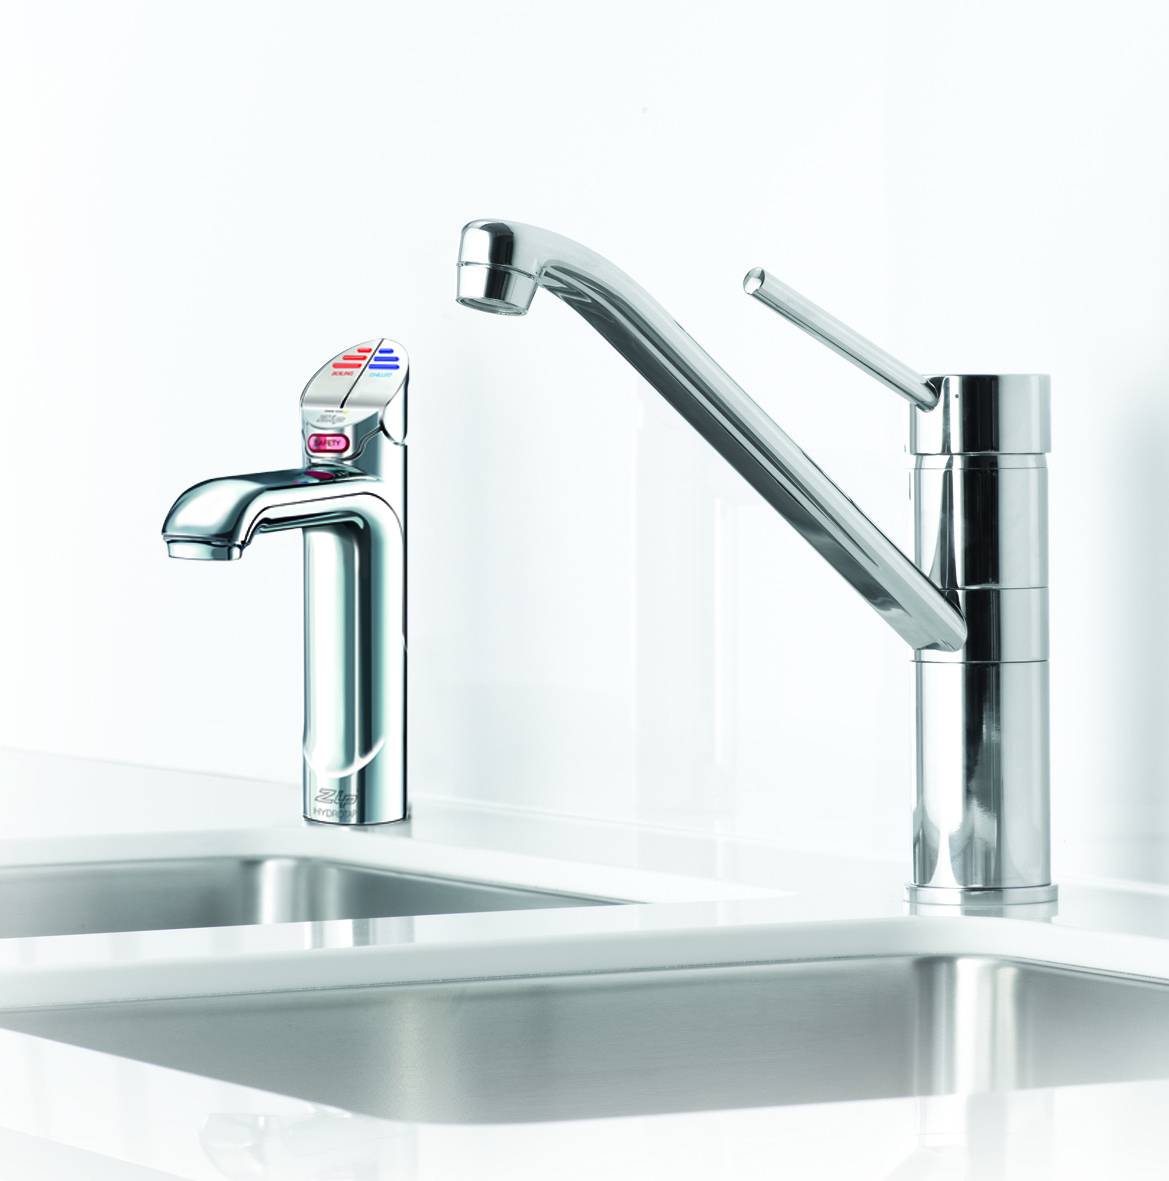 HydroTap Four-in-One